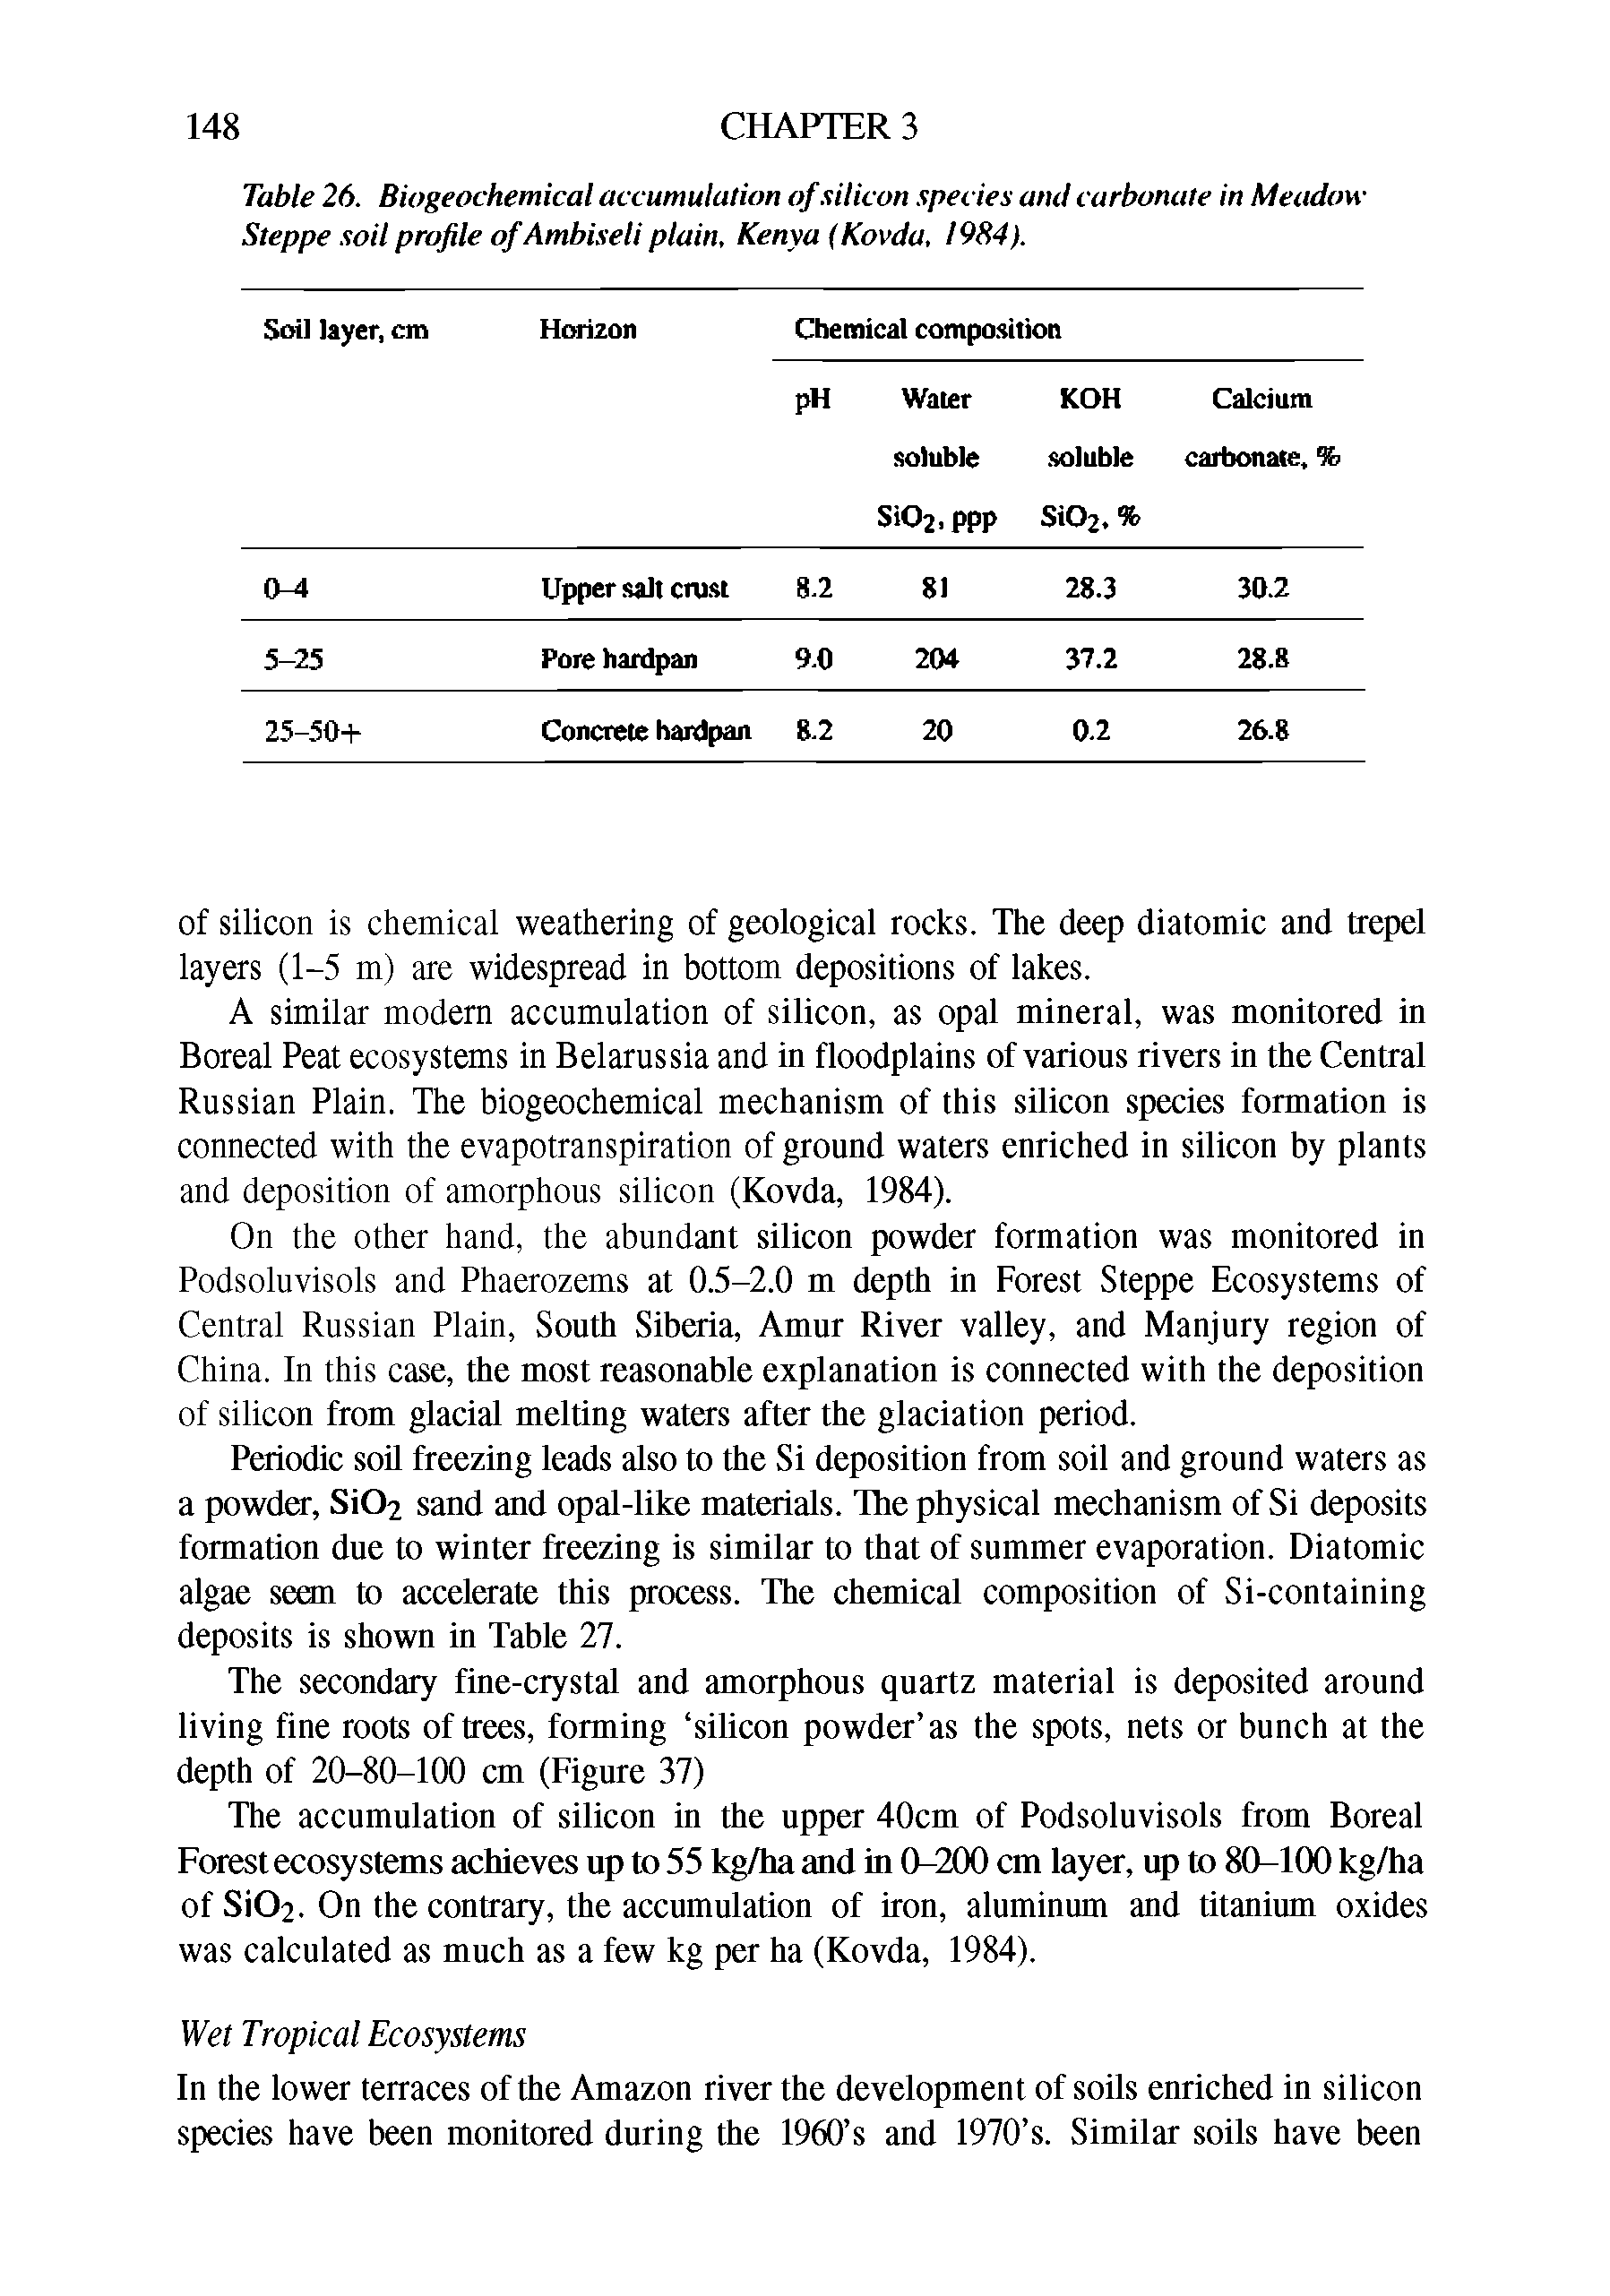 Table 26. Biogeochemical accumulation of silicon. species and carbonate in Meadow Steppe soil profile of Ambiseli plain, Kenya (Kovda, 1984).